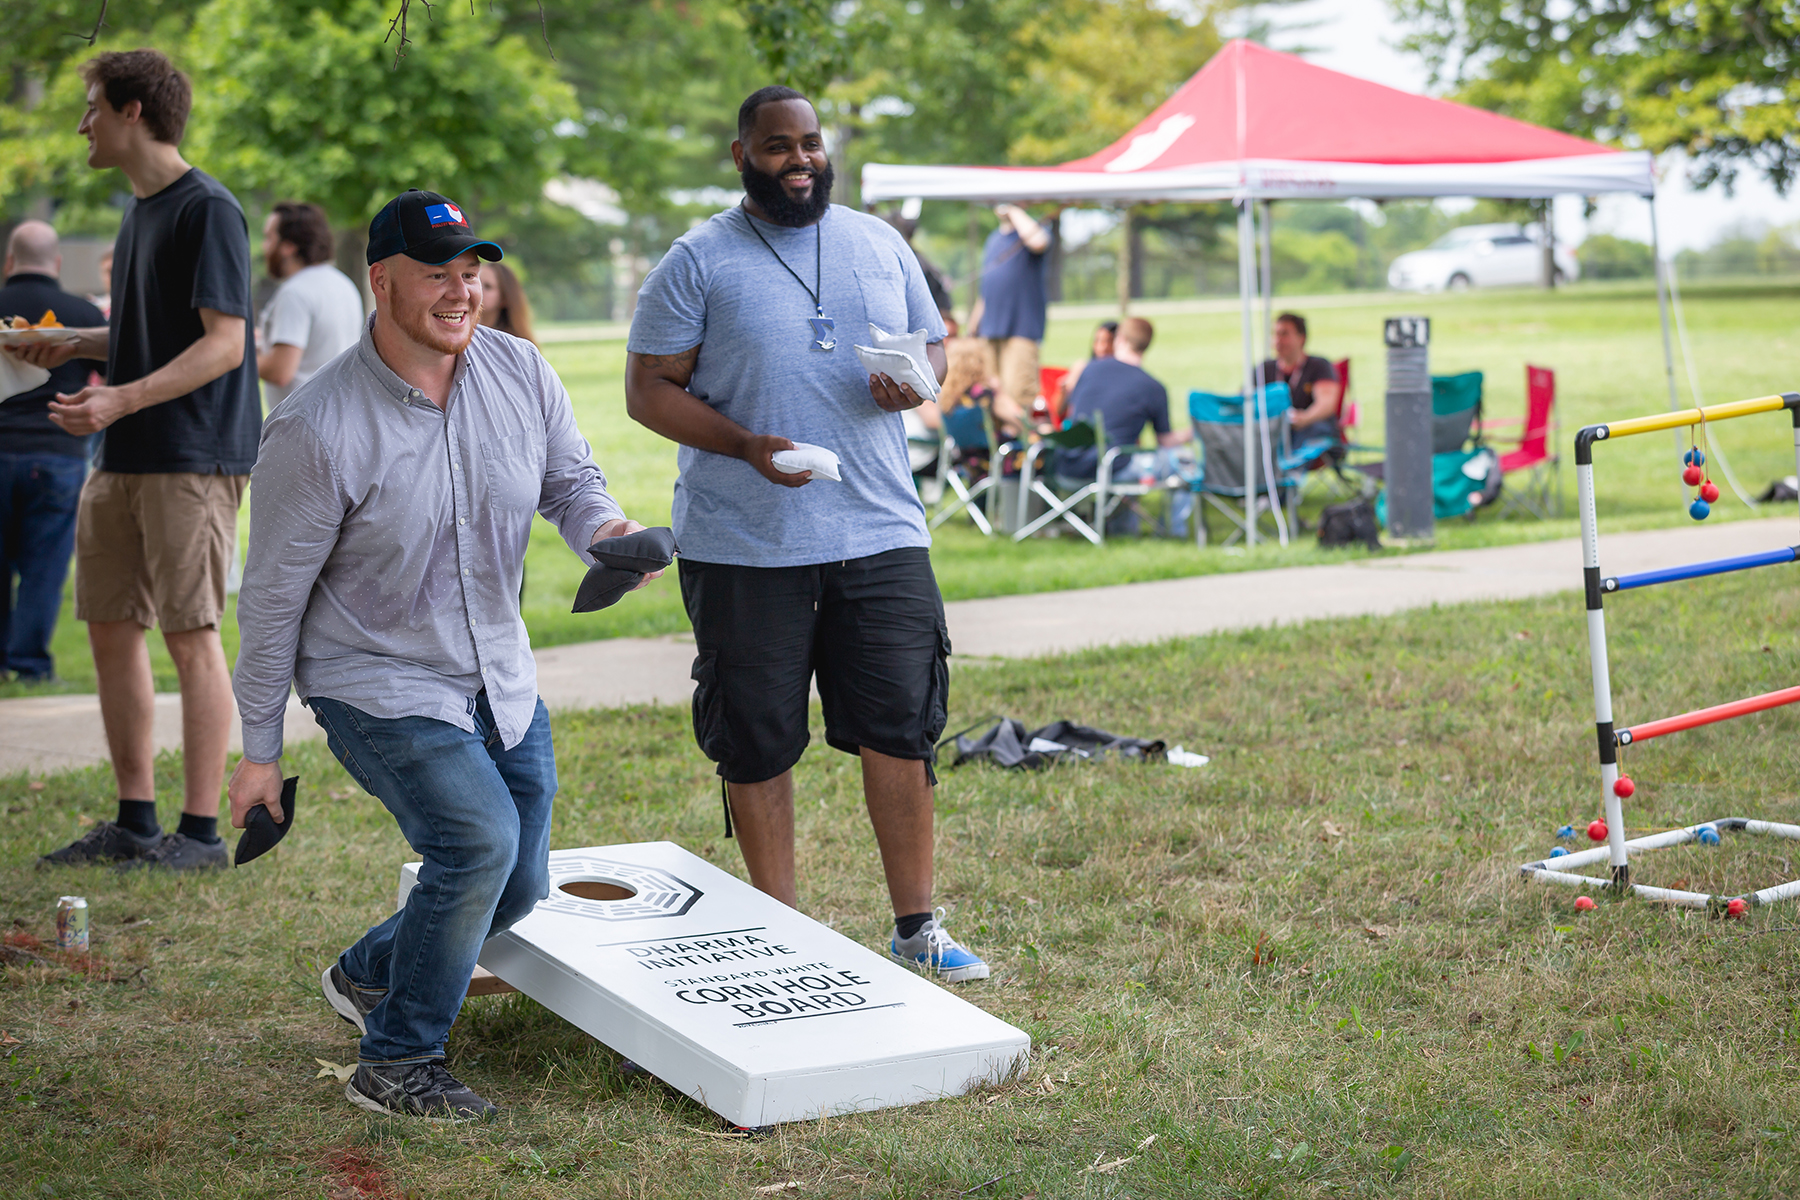 two men standing side by side at a staff picnic, holding corn hole bean bags, one of them beginning to throw his. both are smiling.